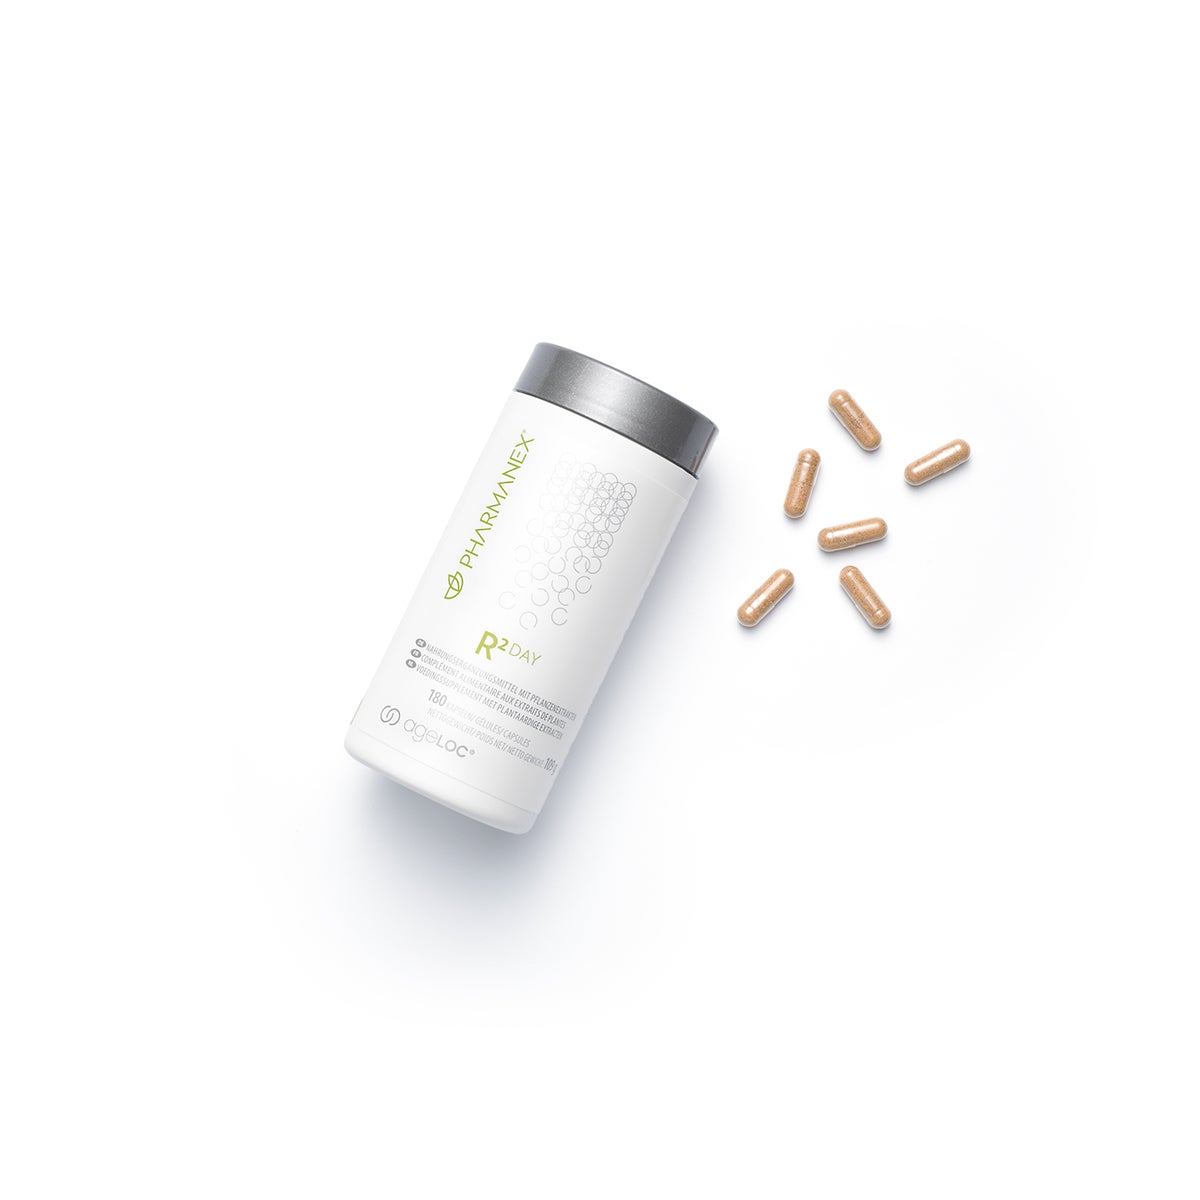 pharmanex-r2-day-bottle-and-capsule-aerial